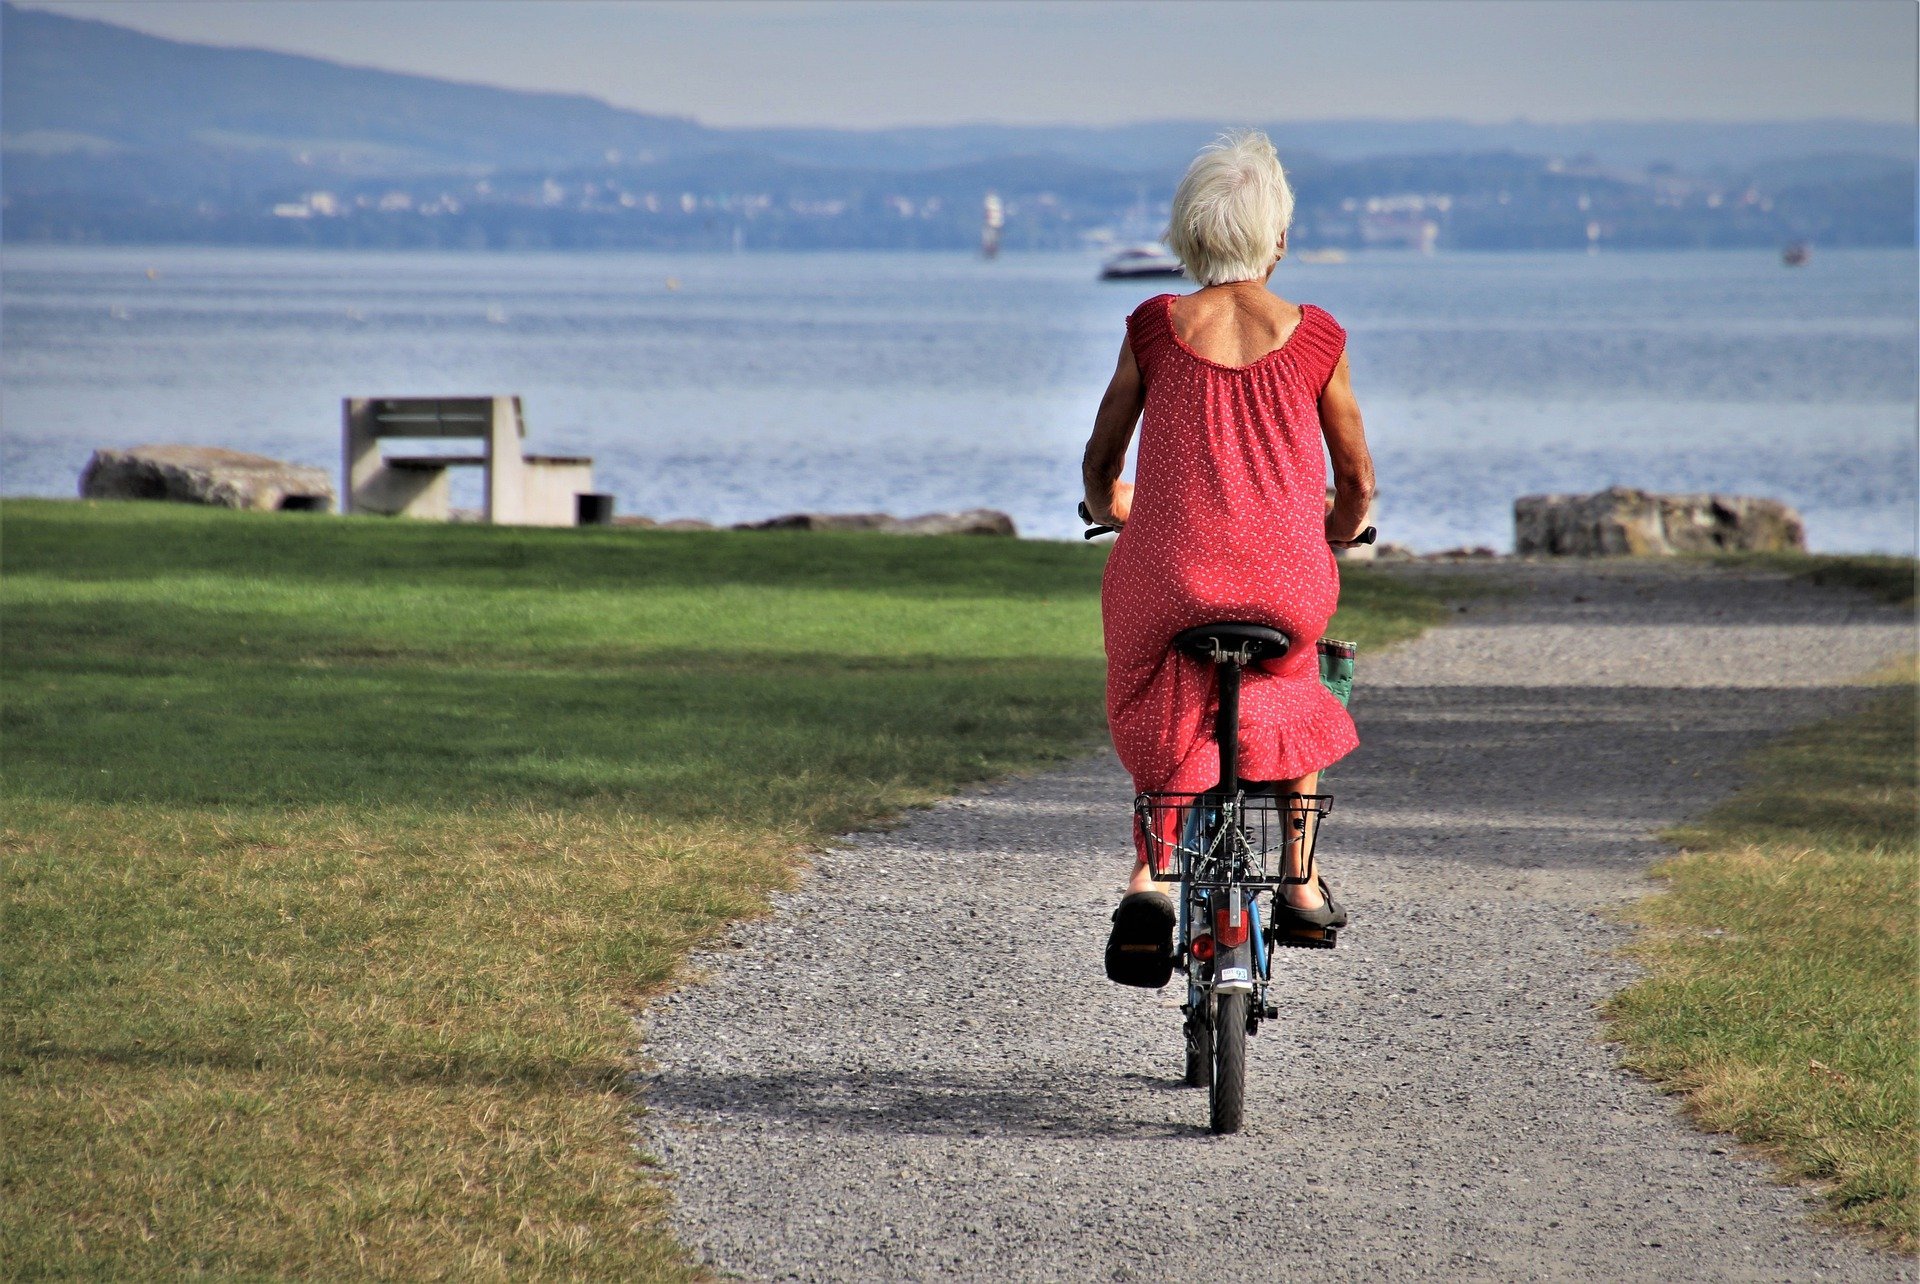 Pictured - An elderly woman riding a bike | Source: Pixabay